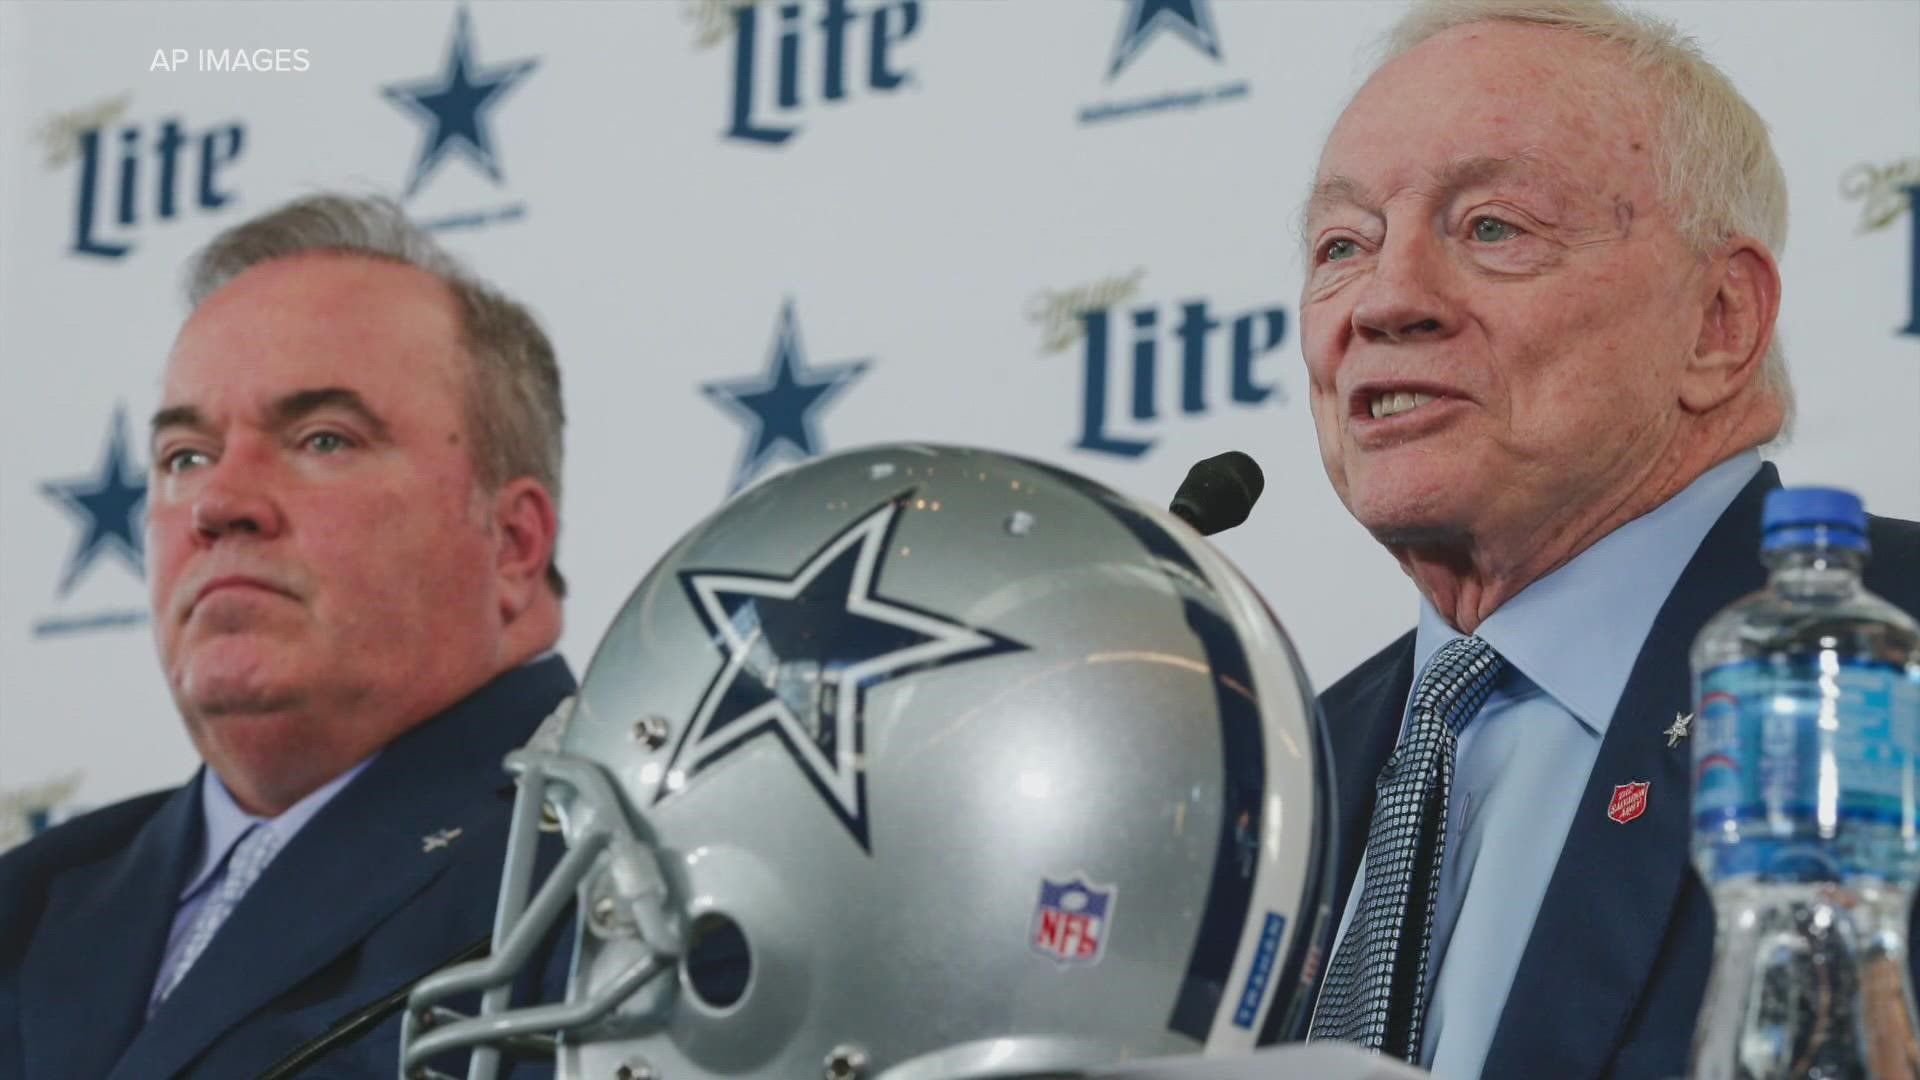 The Dallas Cowboys will have their first pick in the NFL Draft at No. 24 in the first round.